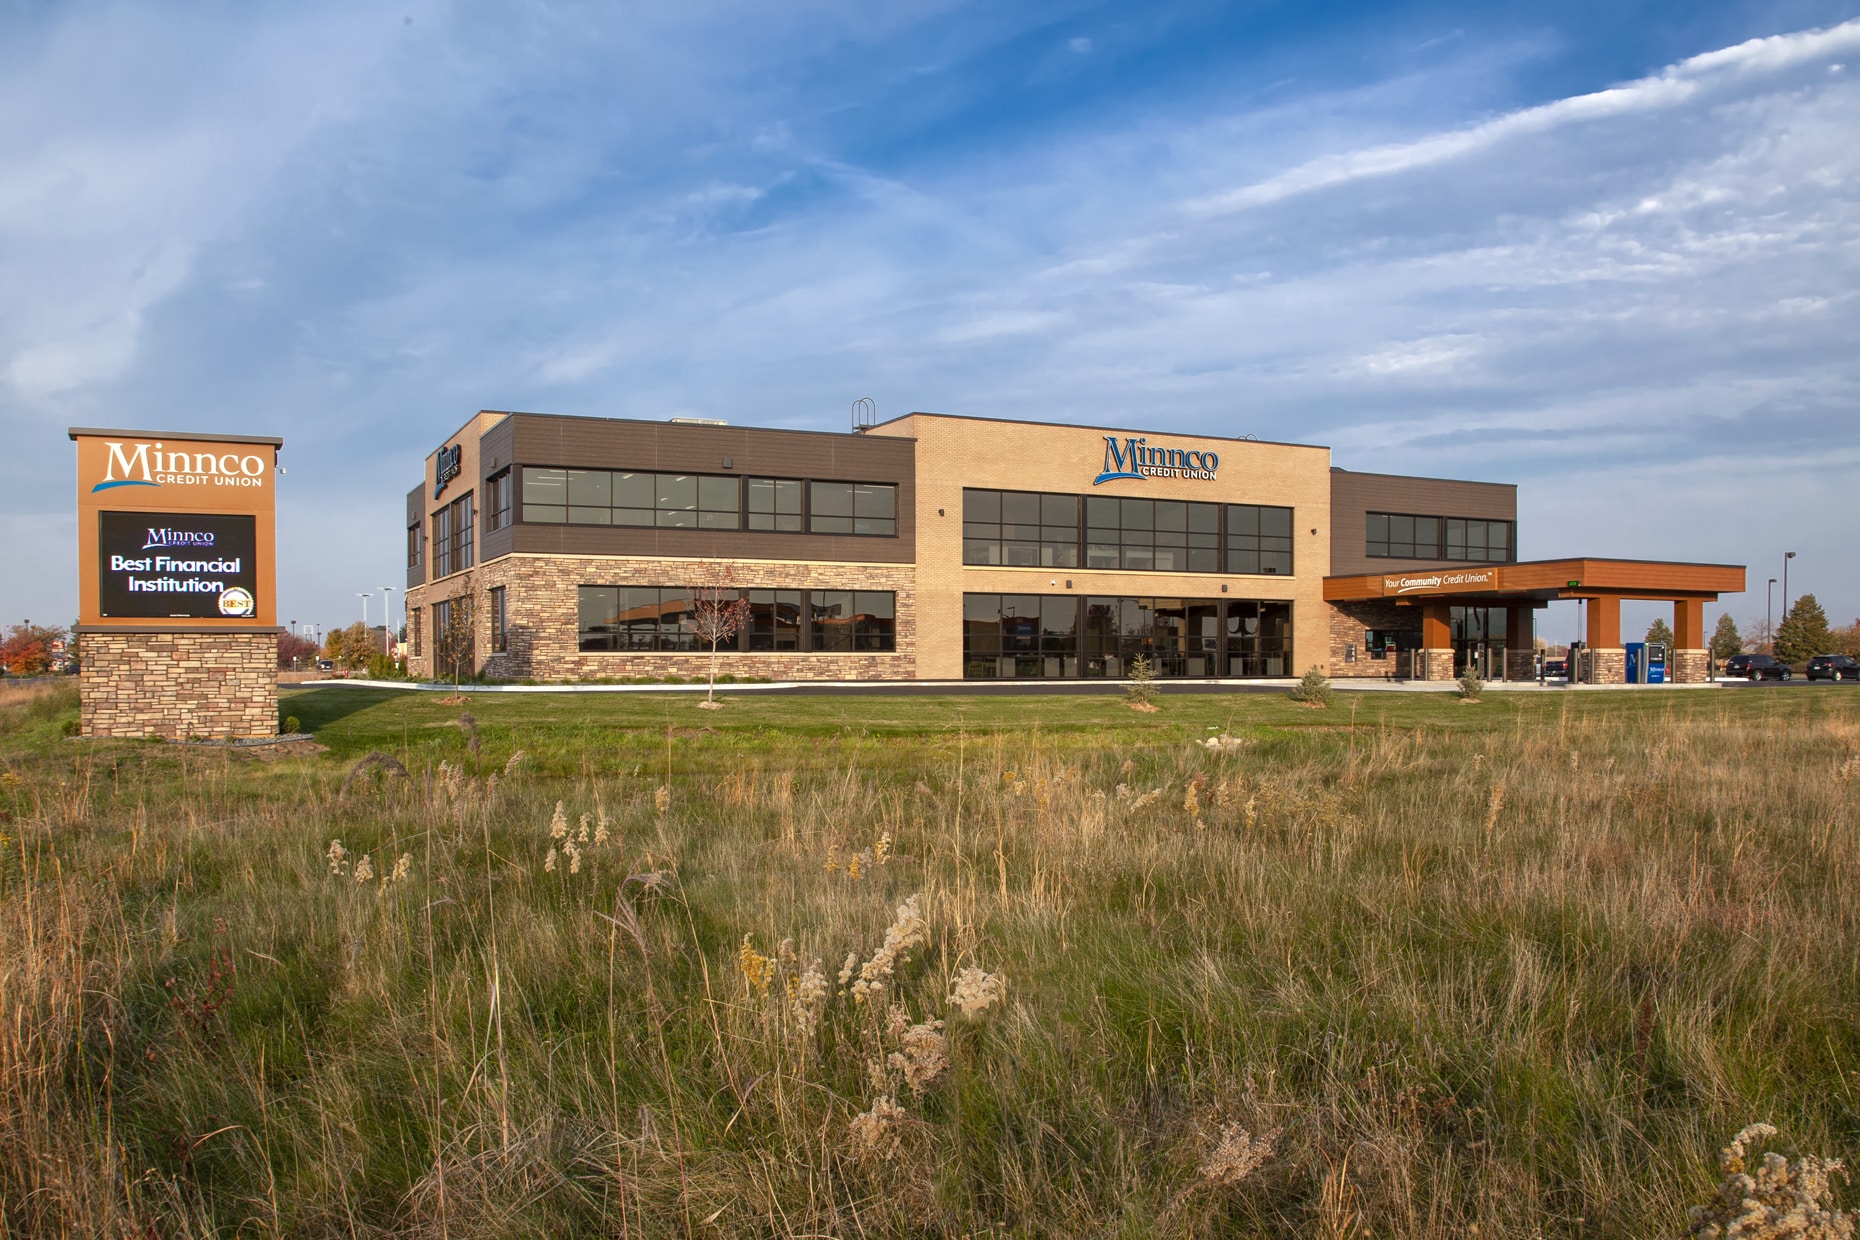 Build a new financial institution in Minnesota